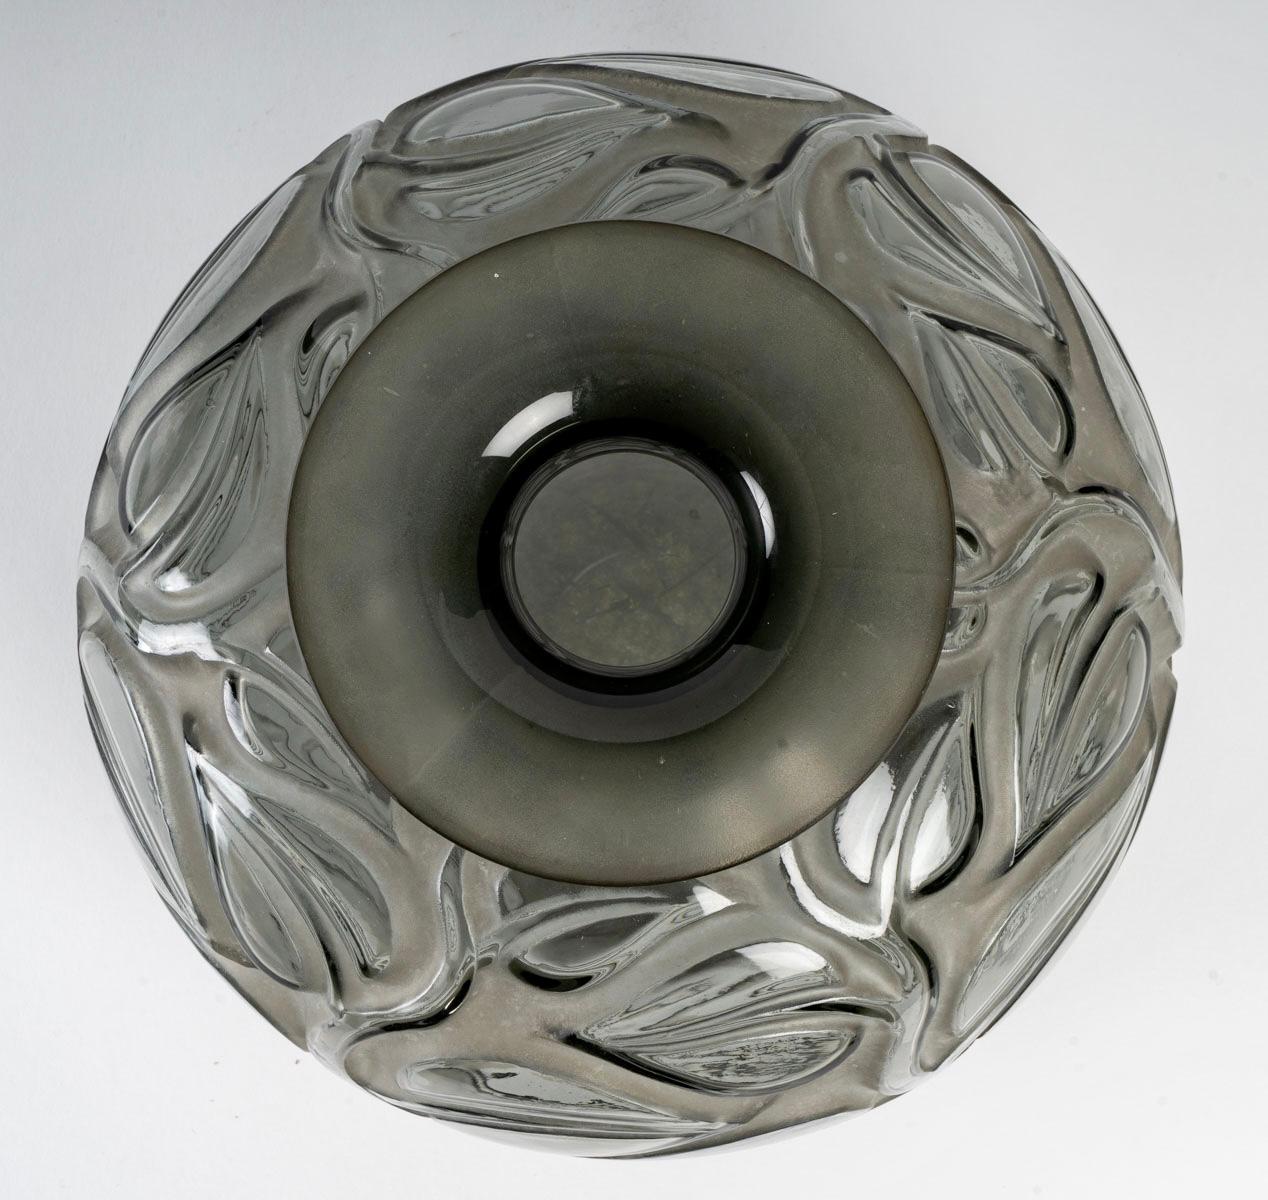 Molded 1926 René Lalique Sophora Vase in Grey Glass with Acid White Patina Leaves